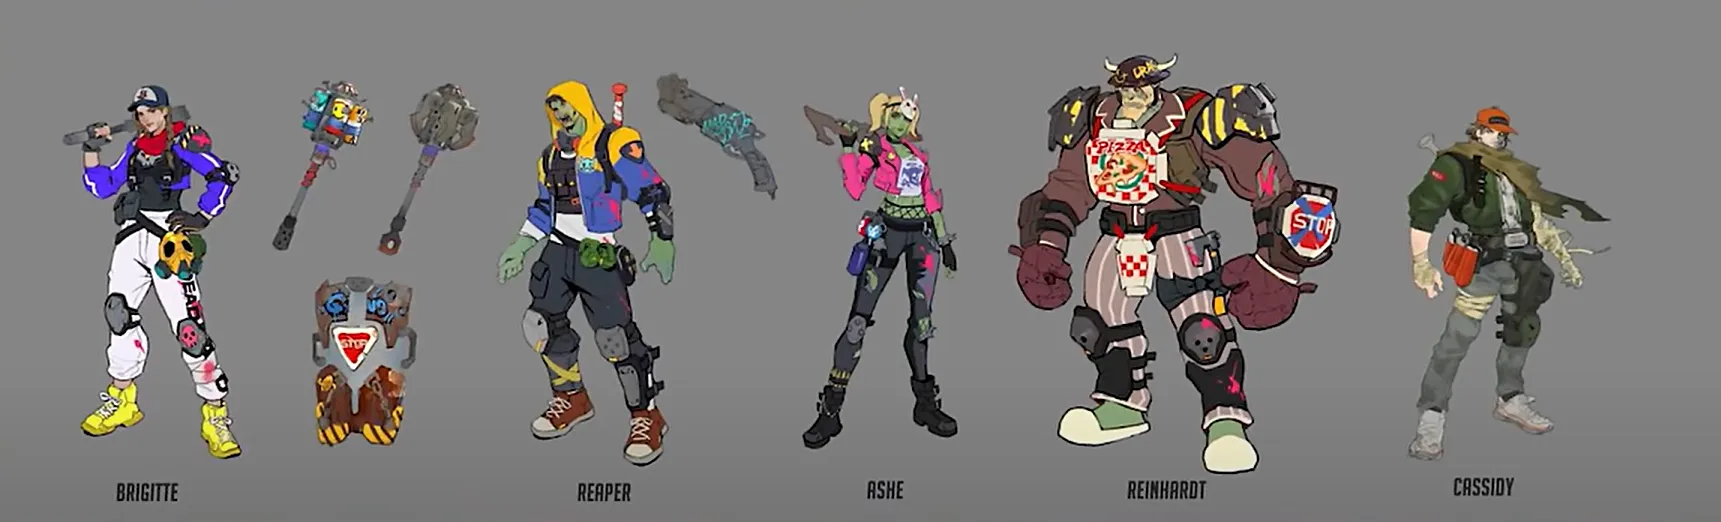 Overwatch 2 New Upcoming Skins Leaked! Zombie-Themed SkinsOverwatch 2 New Upcoming Skins Leaked! Zombie-Themed Skins Brigitte Reaper Ashe Cassidy